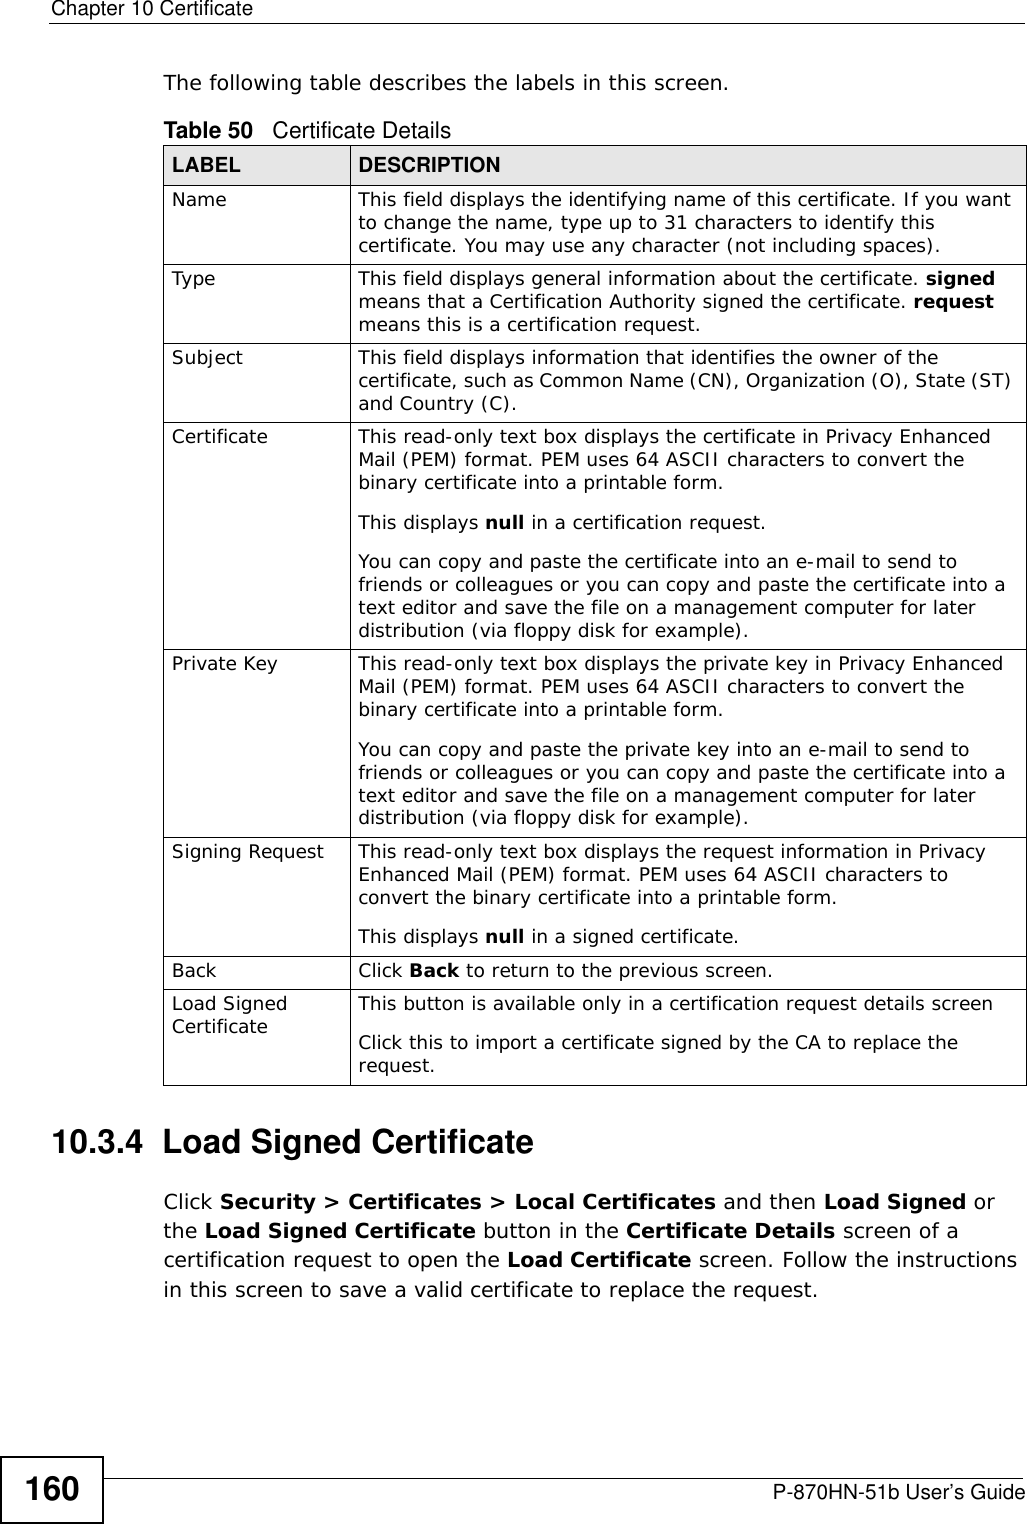 Chapter 10 CertificateP-870HN-51b User’s Guide160The following table describes the labels in this screen. 10.3.4  Load Signed CertificateClick Security &gt; Certificates &gt; Local Certificates and then Load Signed or the Load Signed Certificate button in the Certificate Details screen of a certification request to open the Load Certificate screen. Follow the instructions in this screen to save a valid certificate to replace the request.Table 50   Certificate DetailsLABEL DESCRIPTIONName This field displays the identifying name of this certificate. If you want to change the name, type up to 31 characters to identify this certificate. You may use any character (not including spaces).Type This field displays general information about the certificate. signed means that a Certification Authority signed the certificate. request means this is a certification request.  Subject This field displays information that identifies the owner of the certificate, such as Common Name (CN), Organization (O), State (ST) and Country (C).Certificate This read-only text box displays the certificate in Privacy Enhanced Mail (PEM) format. PEM uses 64 ASCII characters to convert the binary certificate into a printable form. This displays null in a certification request.You can copy and paste the certificate into an e-mail to send to friends or colleagues or you can copy and paste the certificate into a text editor and save the file on a management computer for later distribution (via floppy disk for example).Private Key This read-only text box displays the private key in Privacy Enhanced Mail (PEM) format. PEM uses 64 ASCII characters to convert the binary certificate into a printable form. You can copy and paste the private key into an e-mail to send to friends or colleagues or you can copy and paste the certificate into a text editor and save the file on a management computer for later distribution (via floppy disk for example).Signing Request This read-only text box displays the request information in Privacy Enhanced Mail (PEM) format. PEM uses 64 ASCII characters to convert the binary certificate into a printable form. This displays null in a signed certificate.Back Click Back to return to the previous screen.Load Signed Certificate This button is available only in a certification request details screenClick this to import a certificate signed by the CA to replace the request.